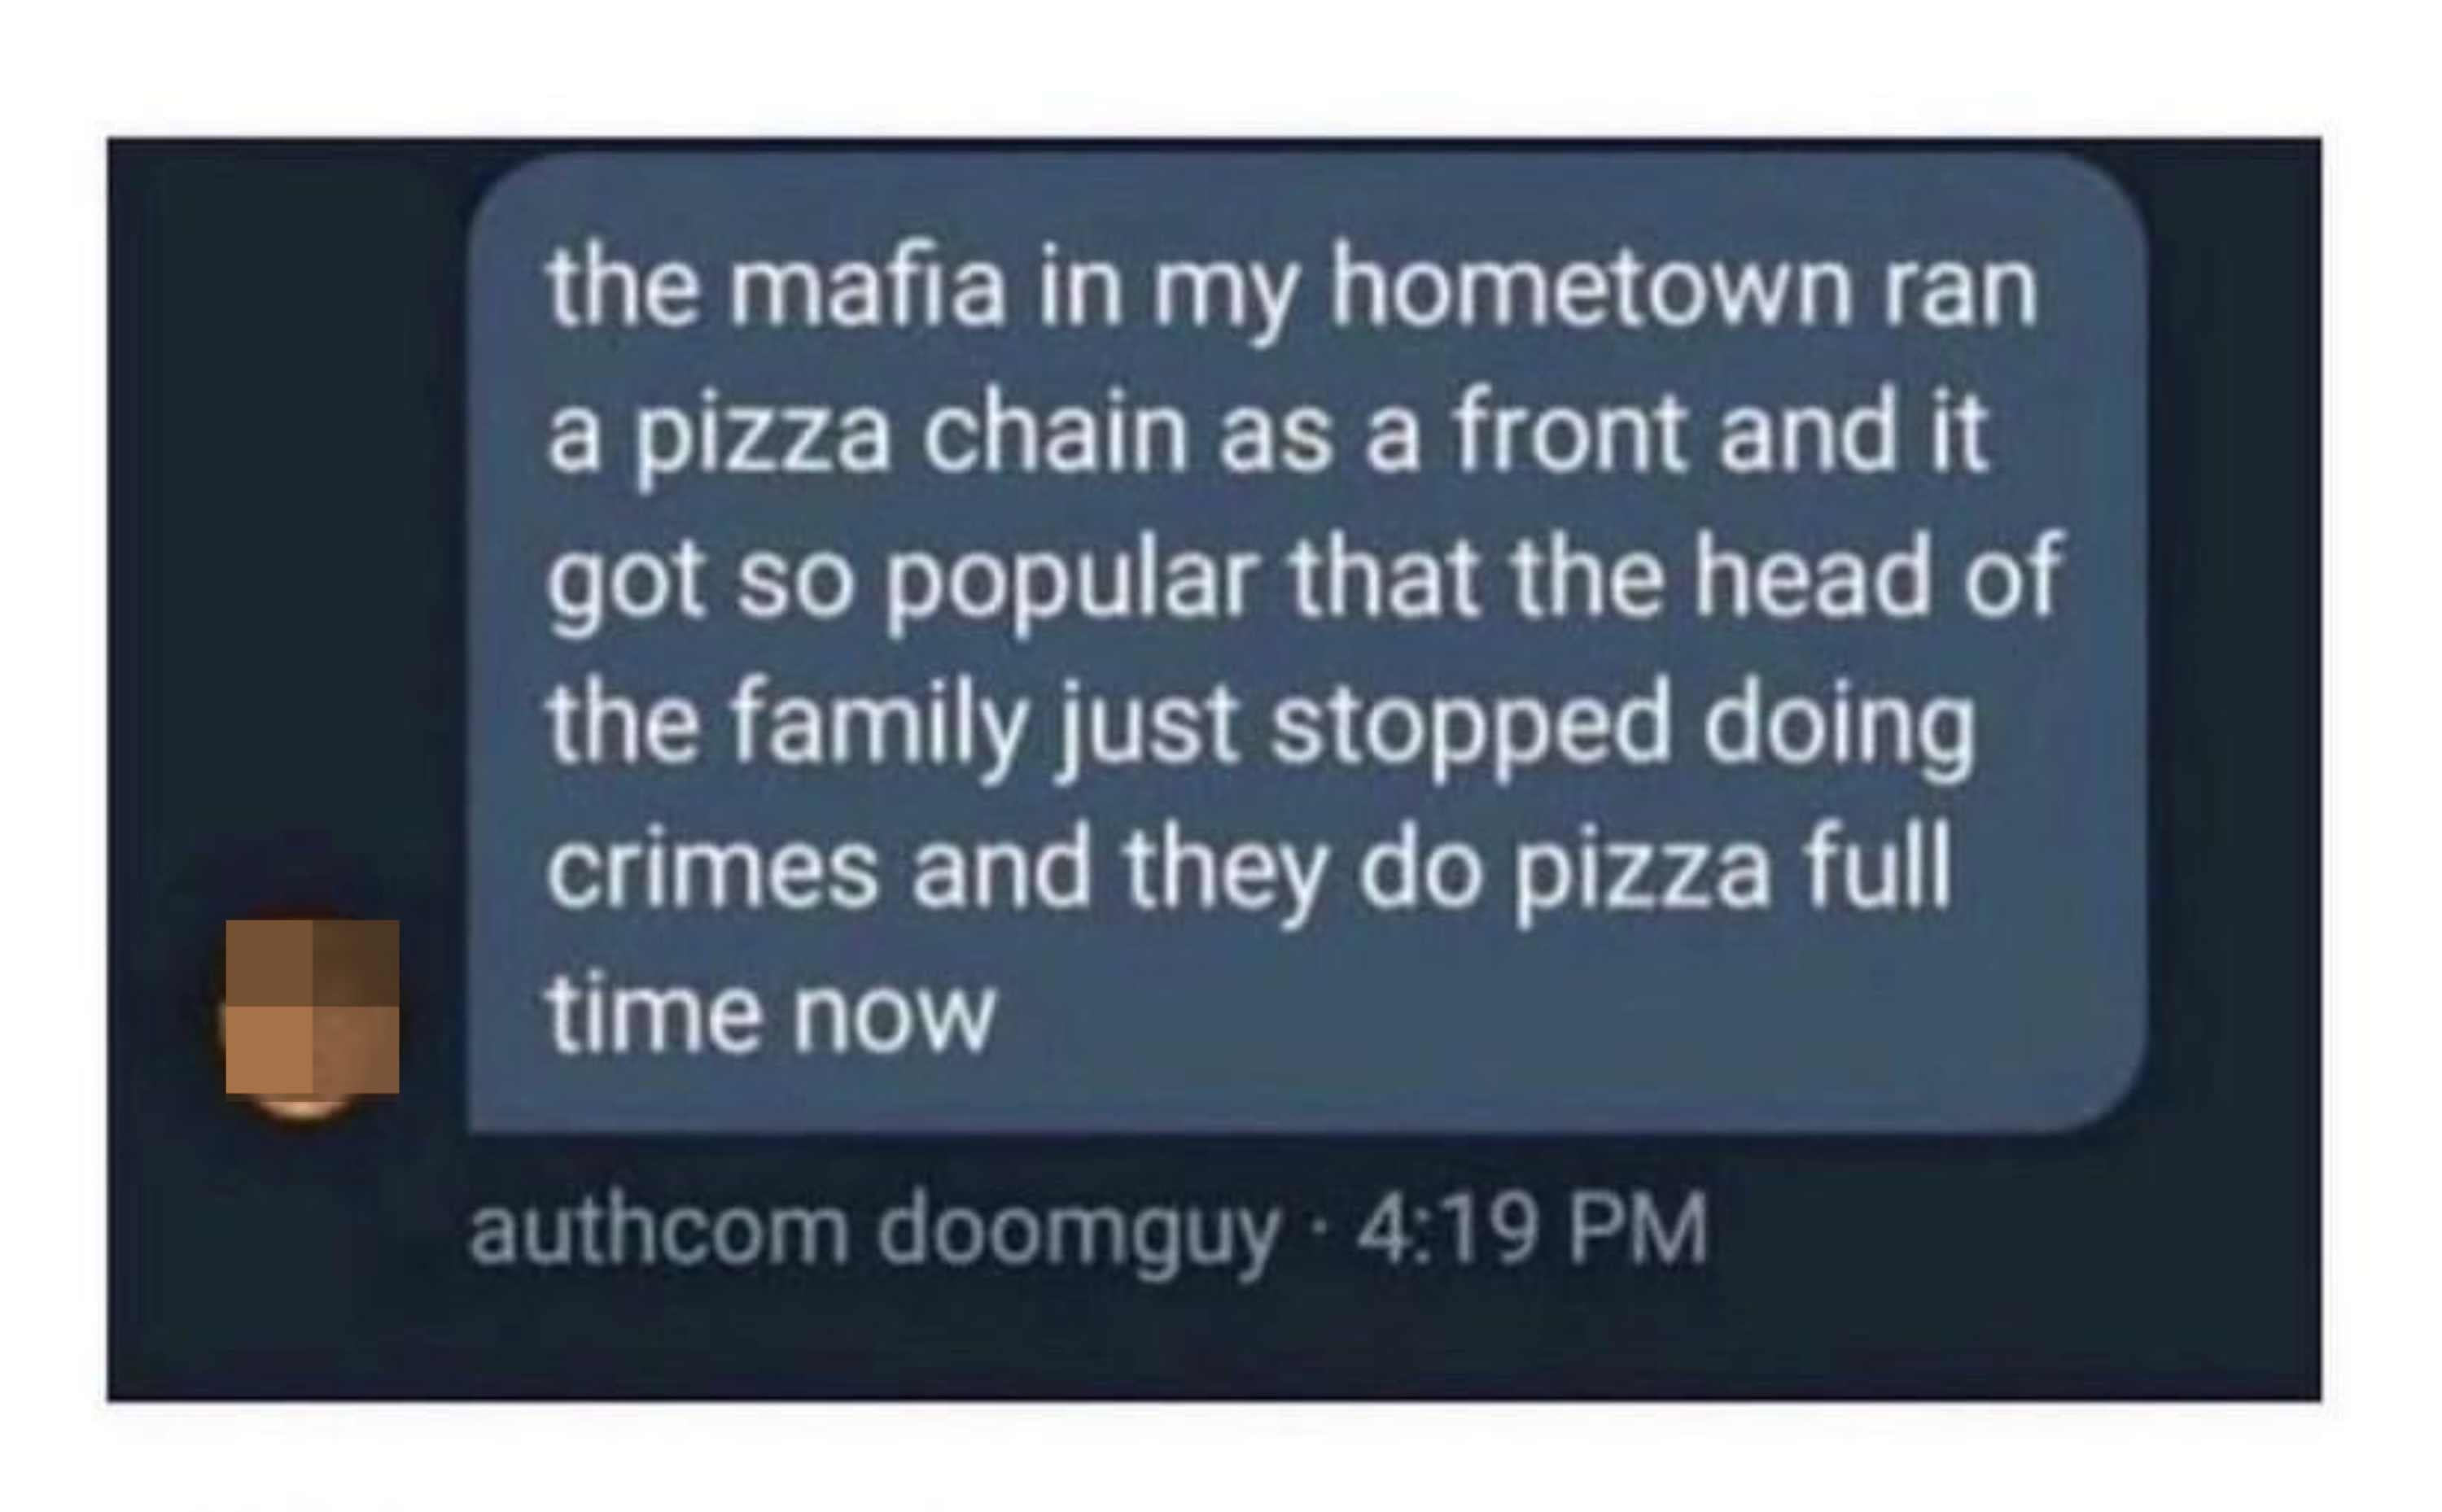 &quot;The mafia in my hometown ran a pizza chain as a front and it got so popular that the head of the family just stopped doing crimes and they do pizza full time now&quot;